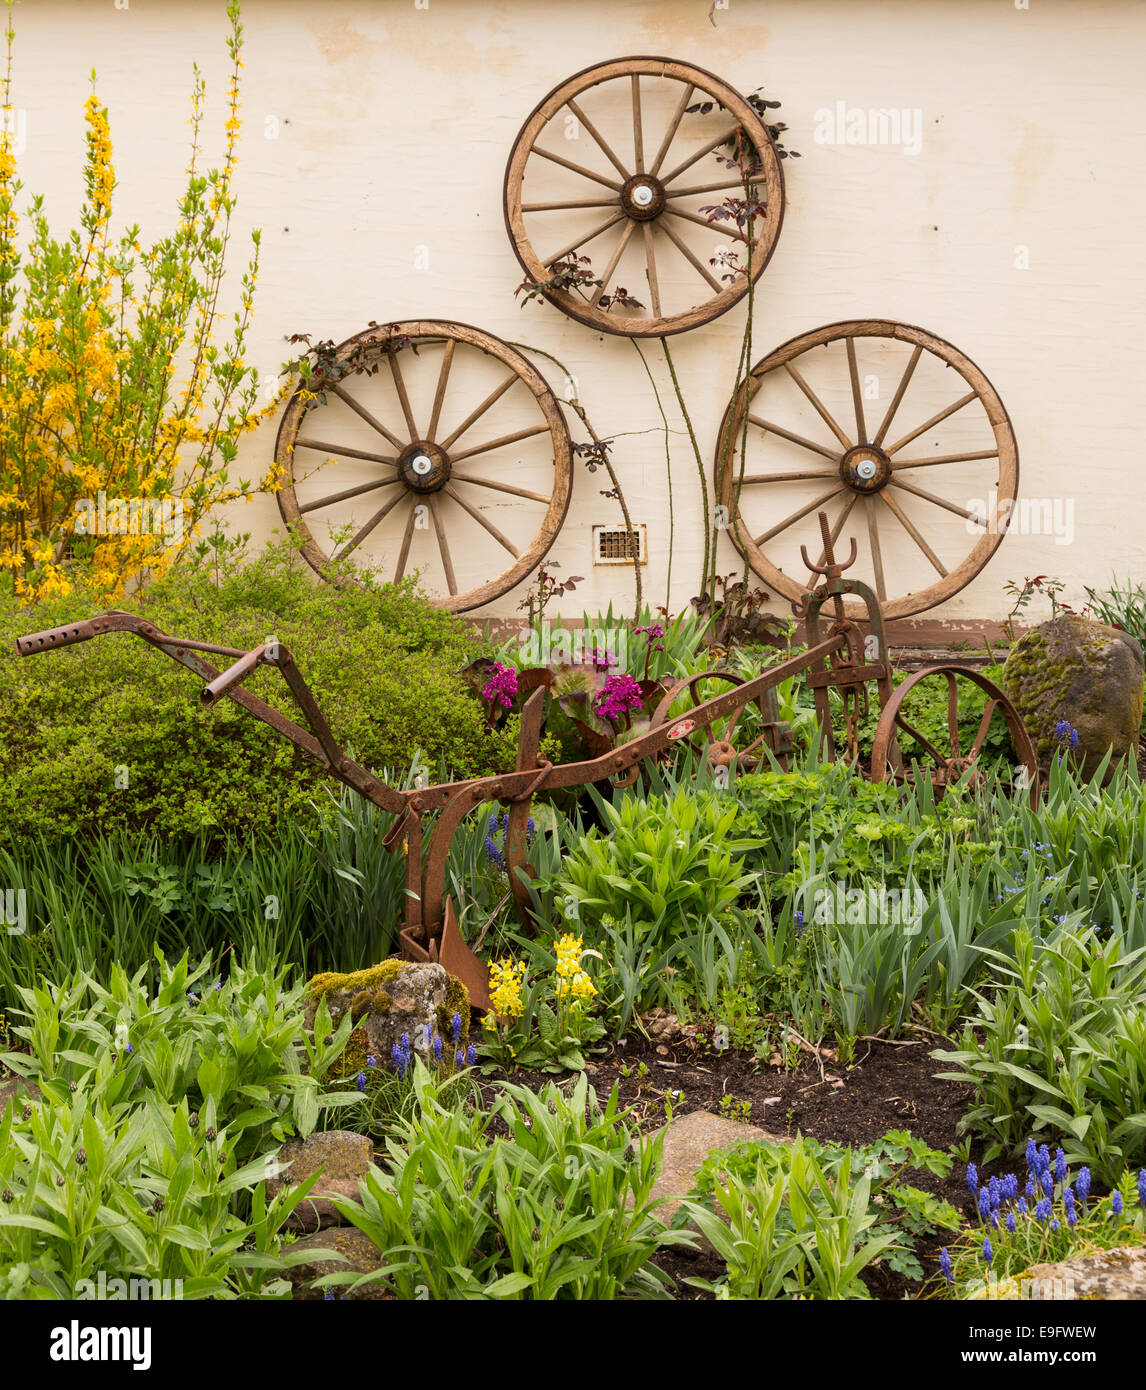 Rural garden decorated with cart wheels Stock Photo